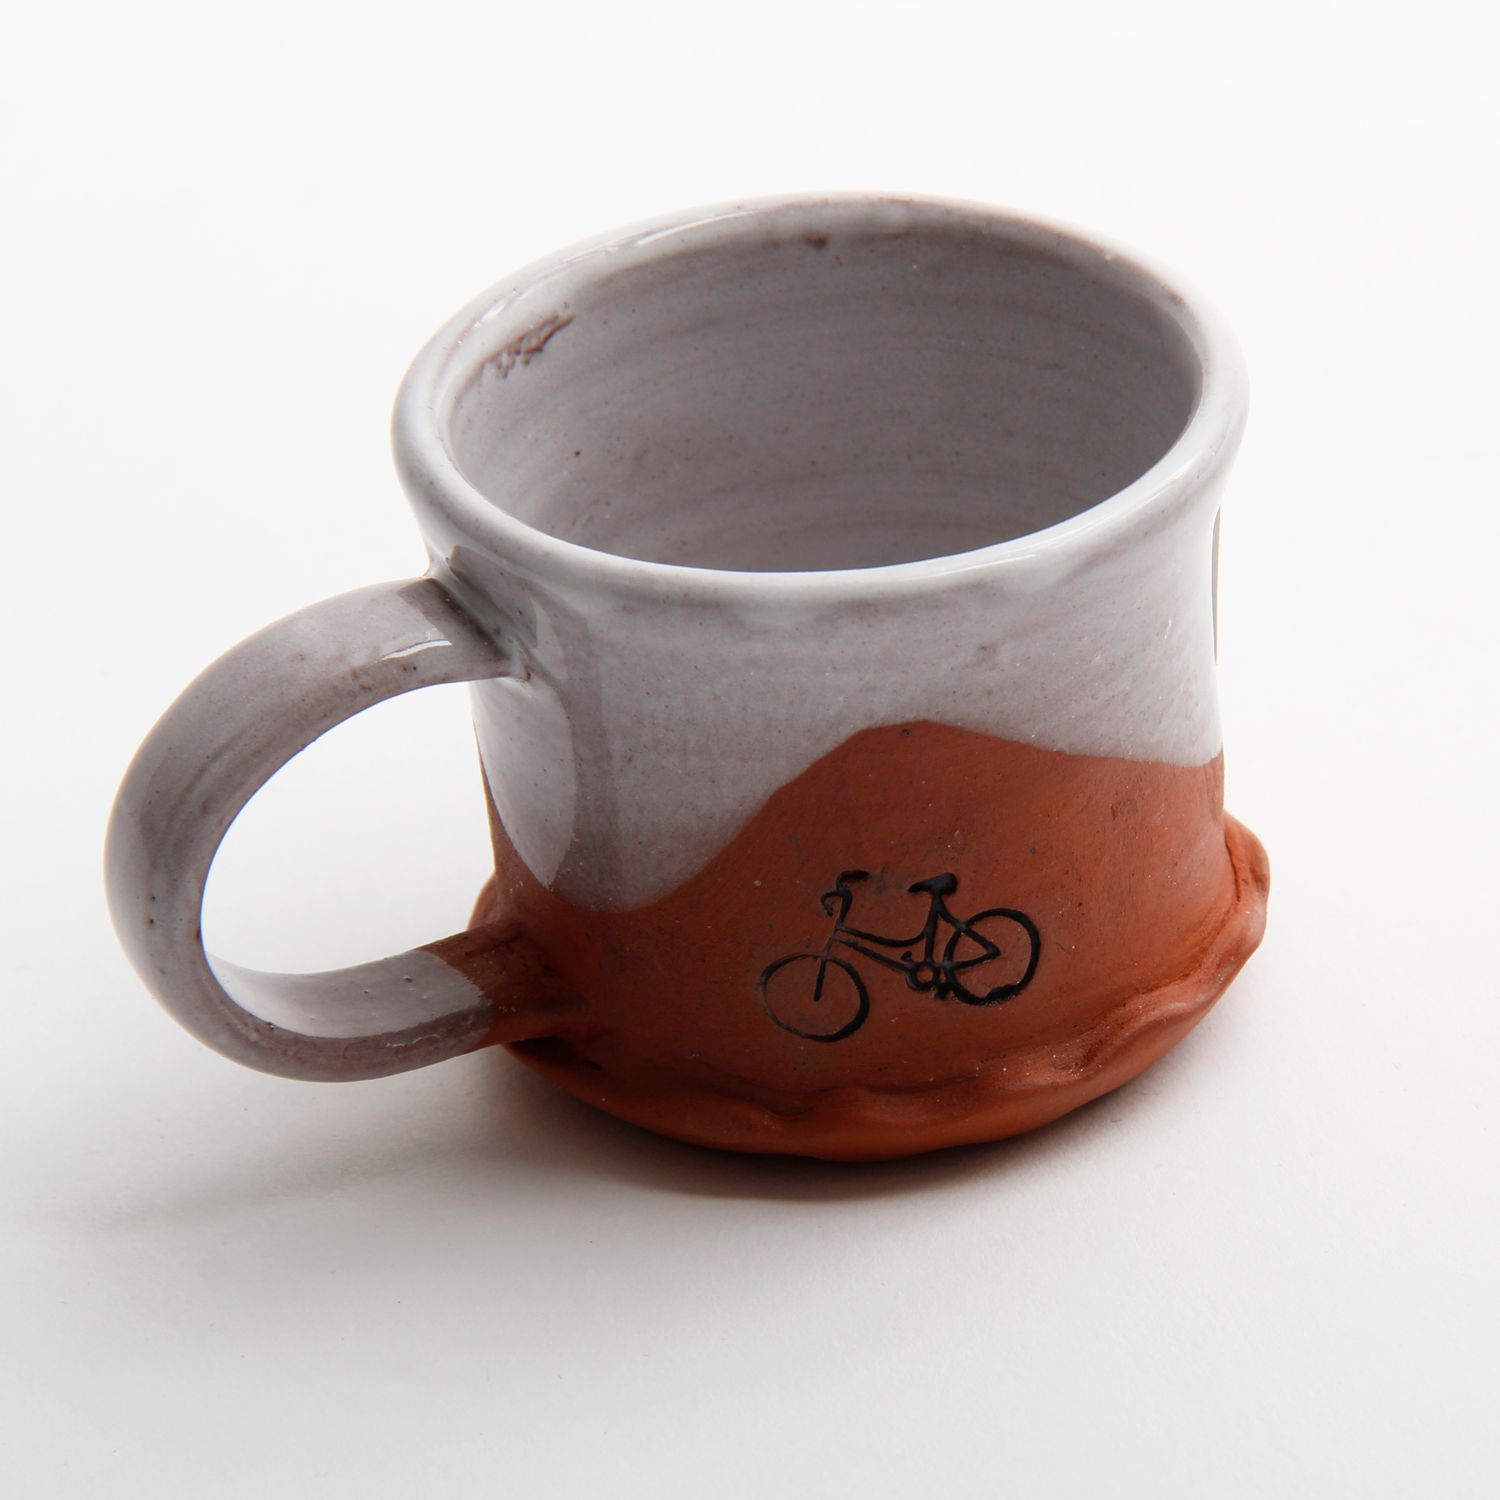 Mary McKenzie: Espresso Cup White Product Image 1 of 2